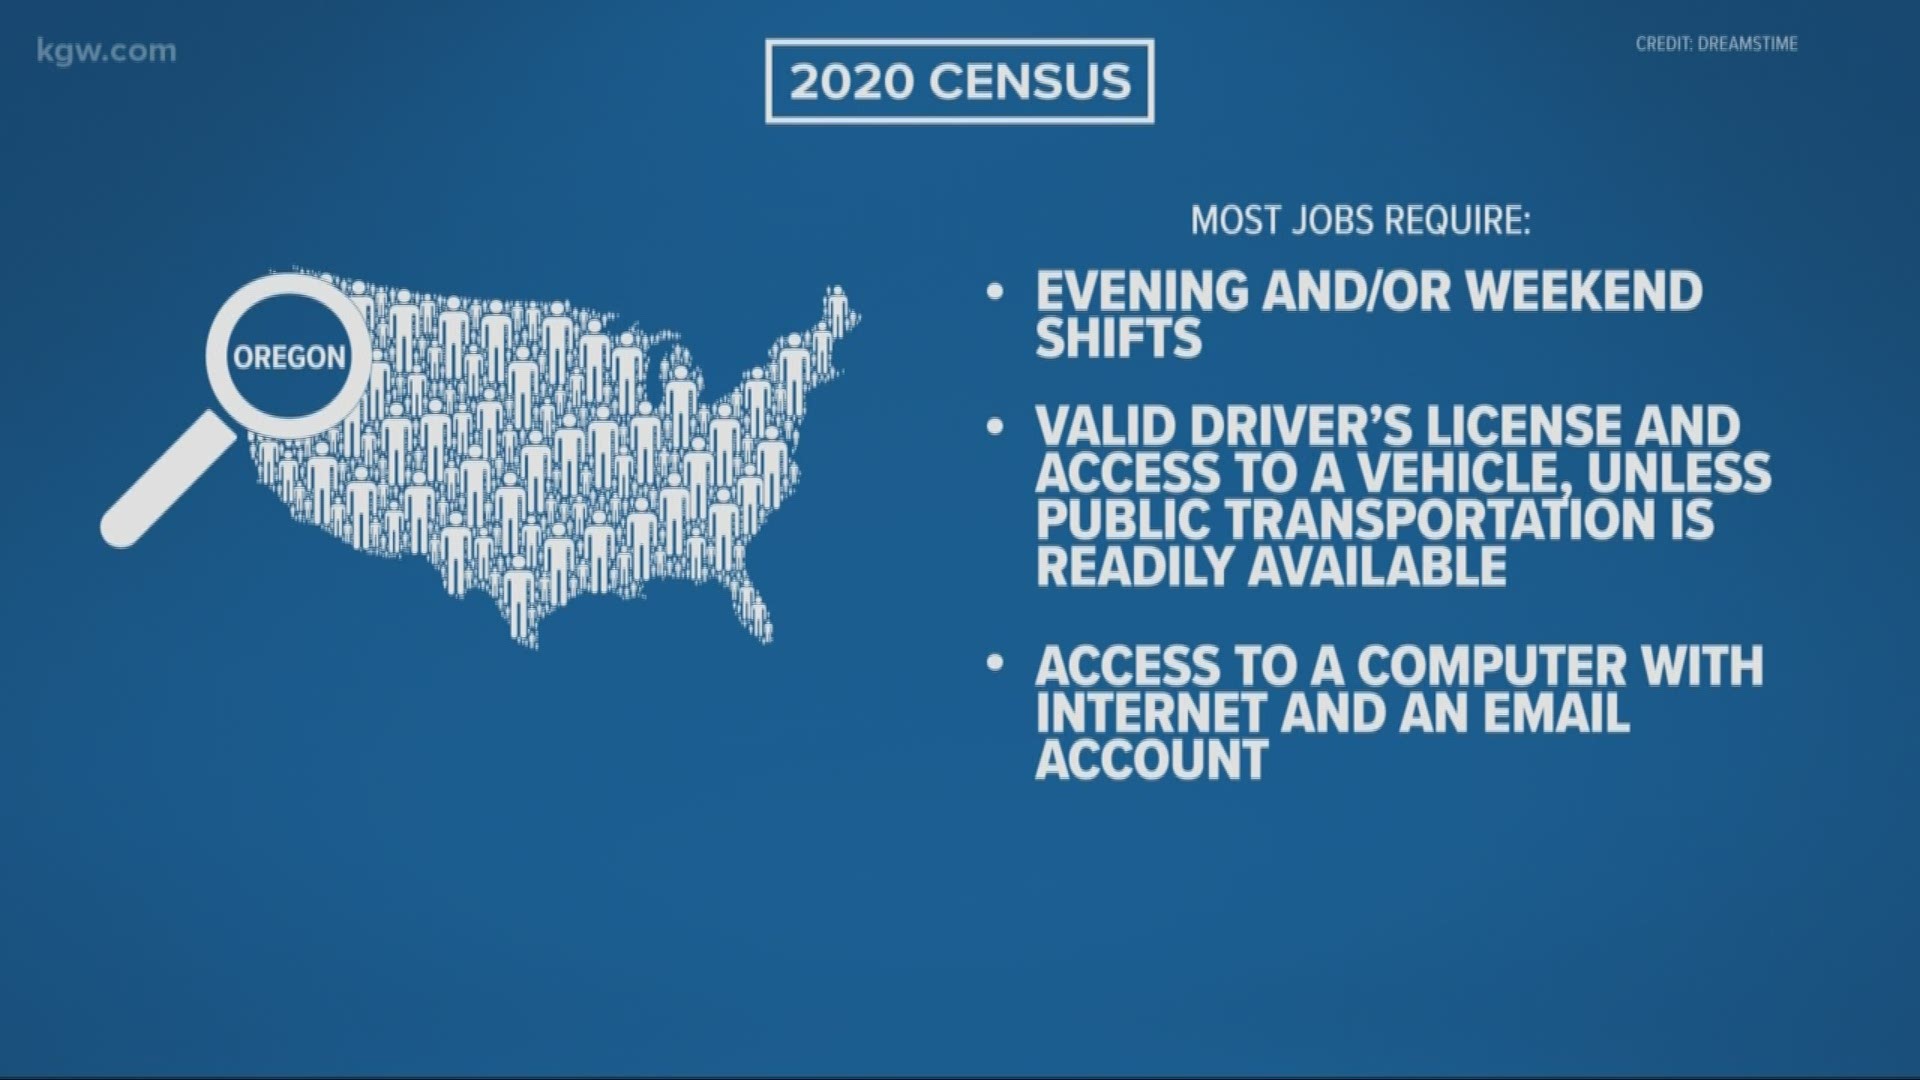 Officials are looking for census takers in Oregon. The work is flexible, part time, and temporary.